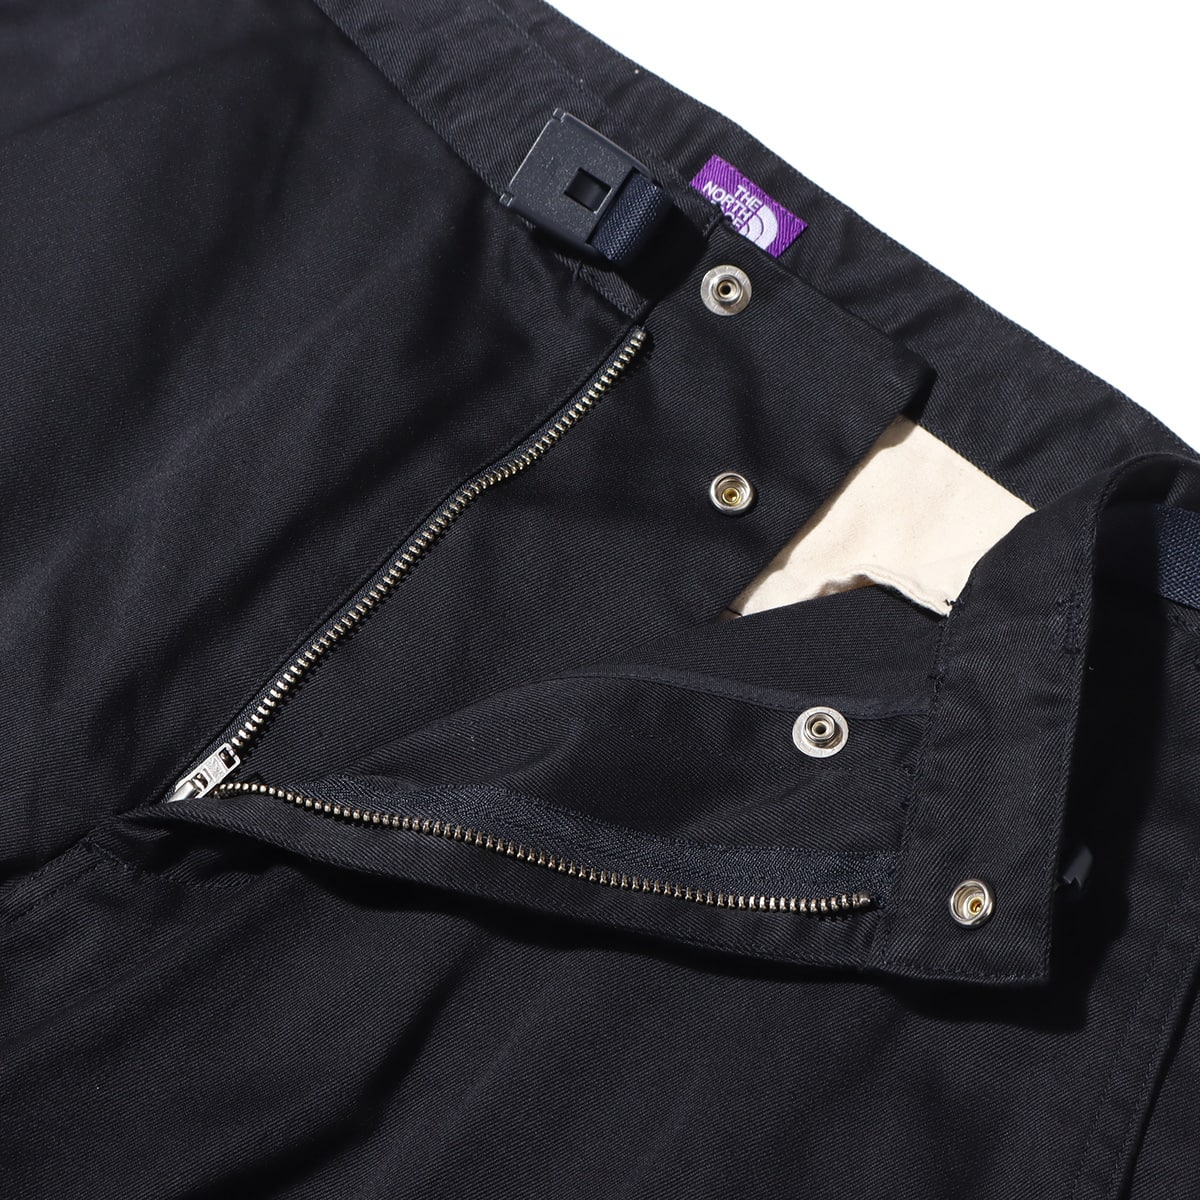 THE NORTH FACE PURPLE LABEL Chino Wide Tapered Field Pants Dark Navy